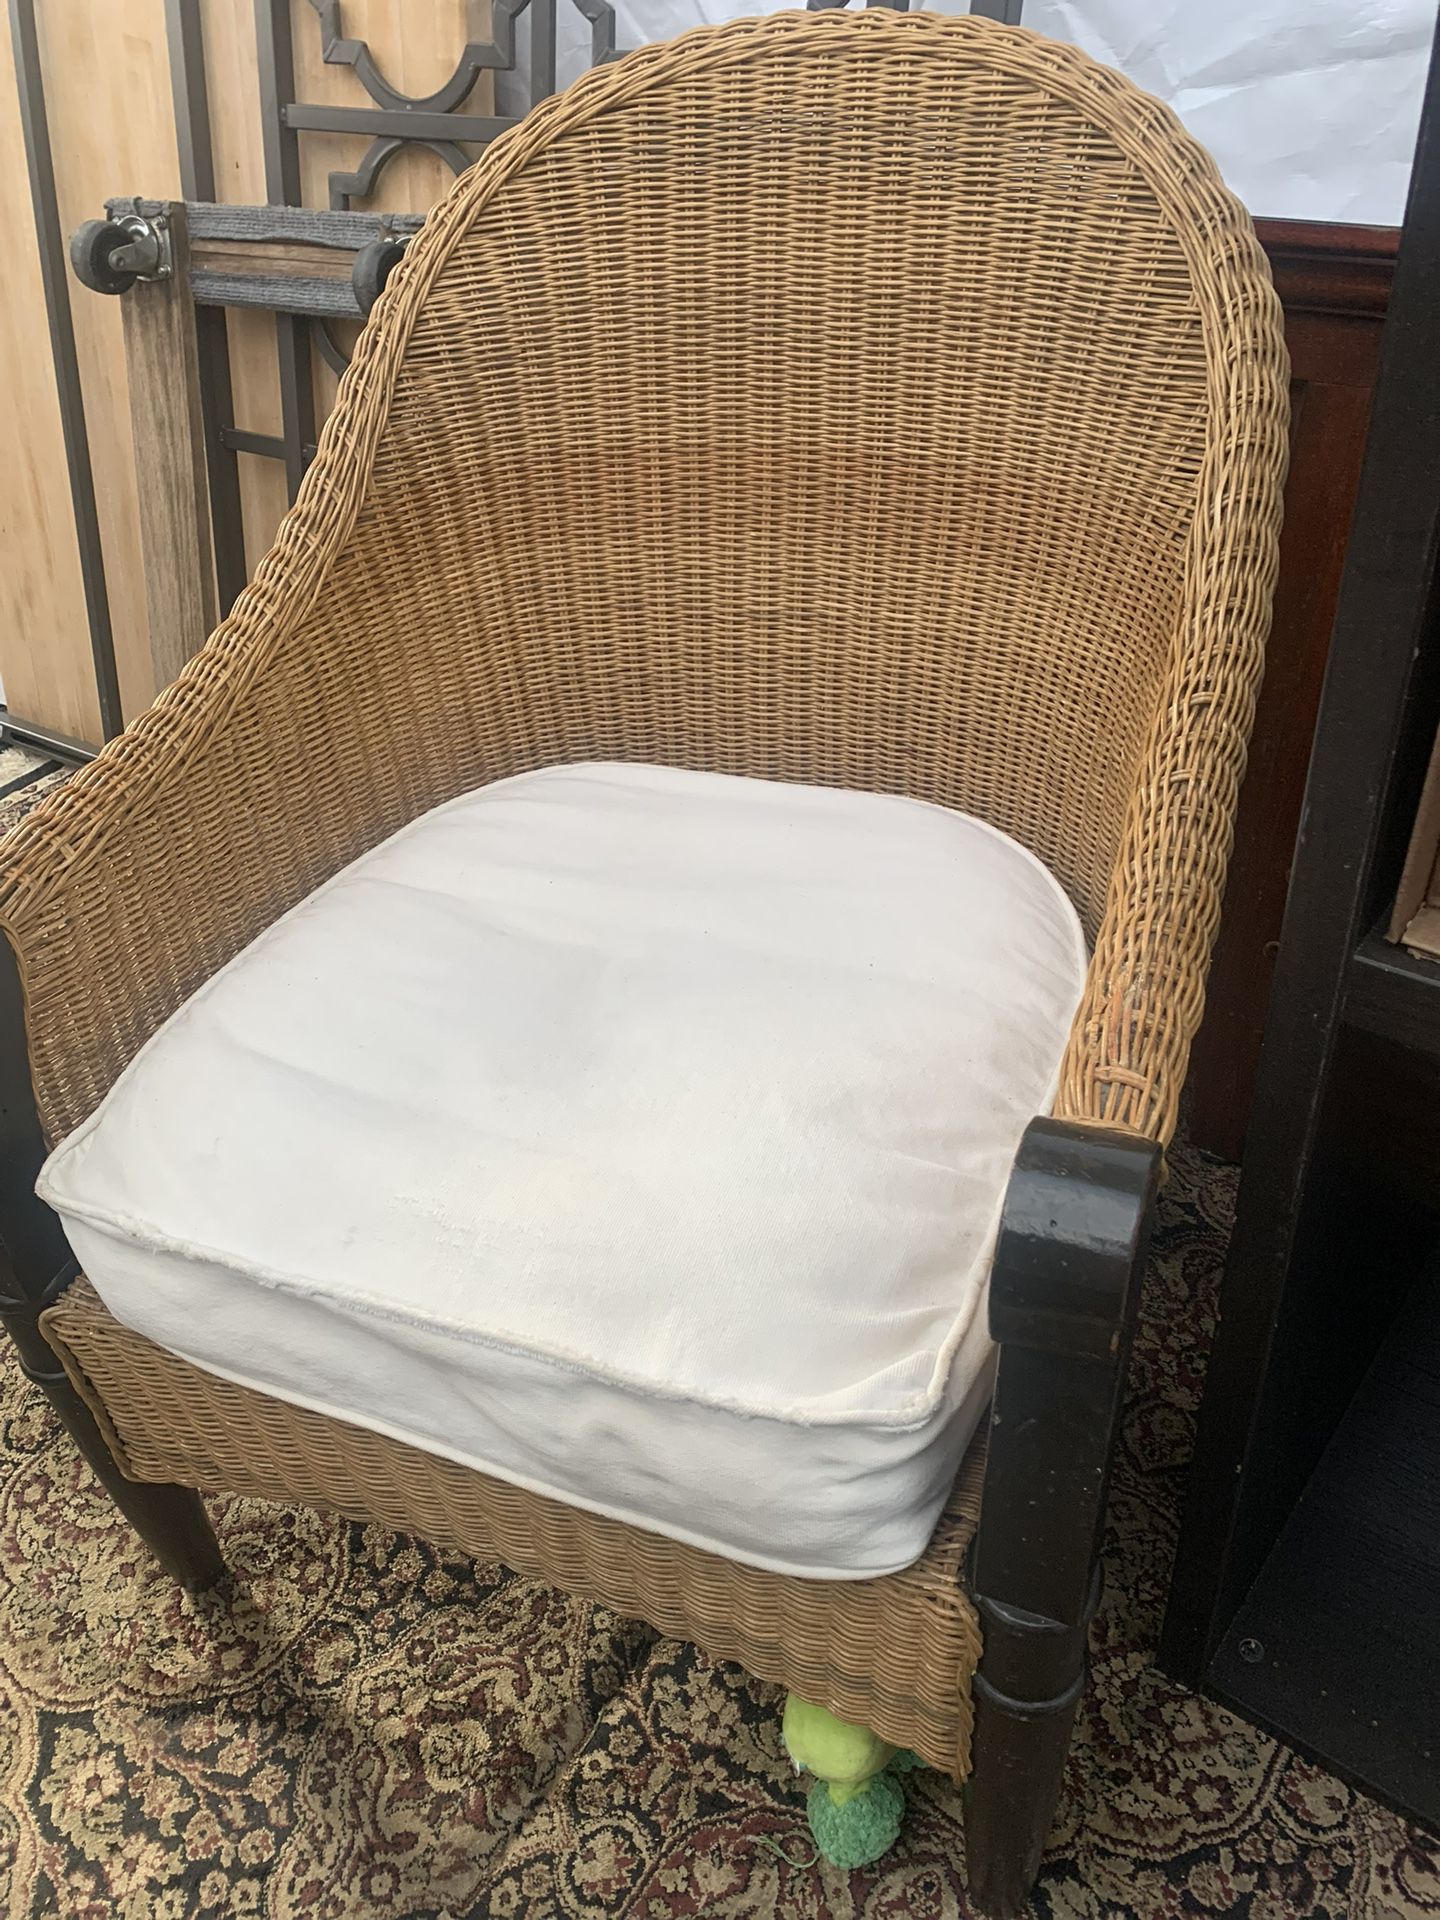 Wicker Rattan Chair patio furniture / feather pillow  26 W x 30 D x 36 H  Seat @ 19